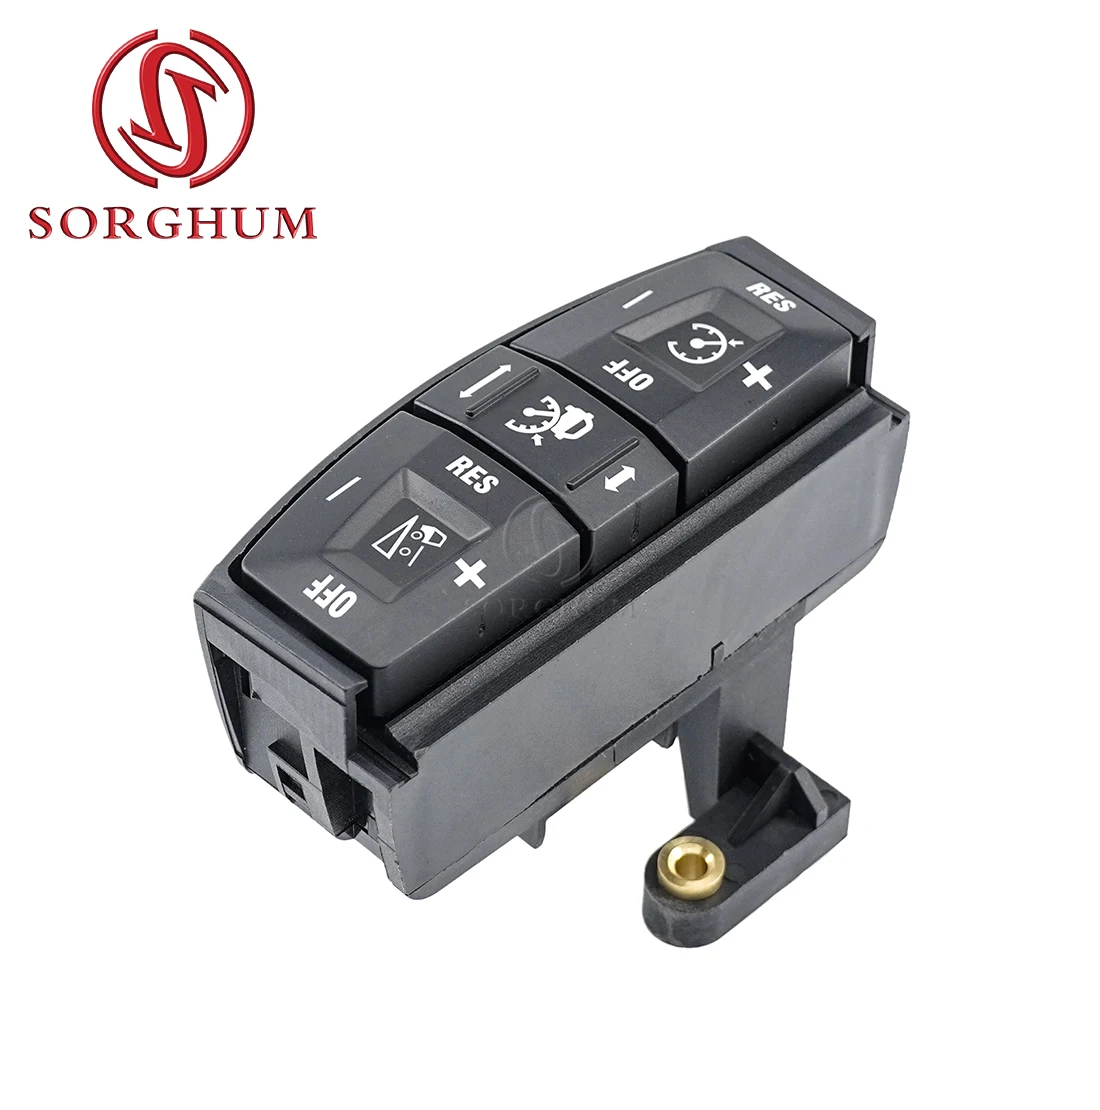 Sorghum 1870911 Truck Panel Cruise Steering Wheel Switch For Scania Lower P G R T Series Spare Parts Hill Descent Control 18007